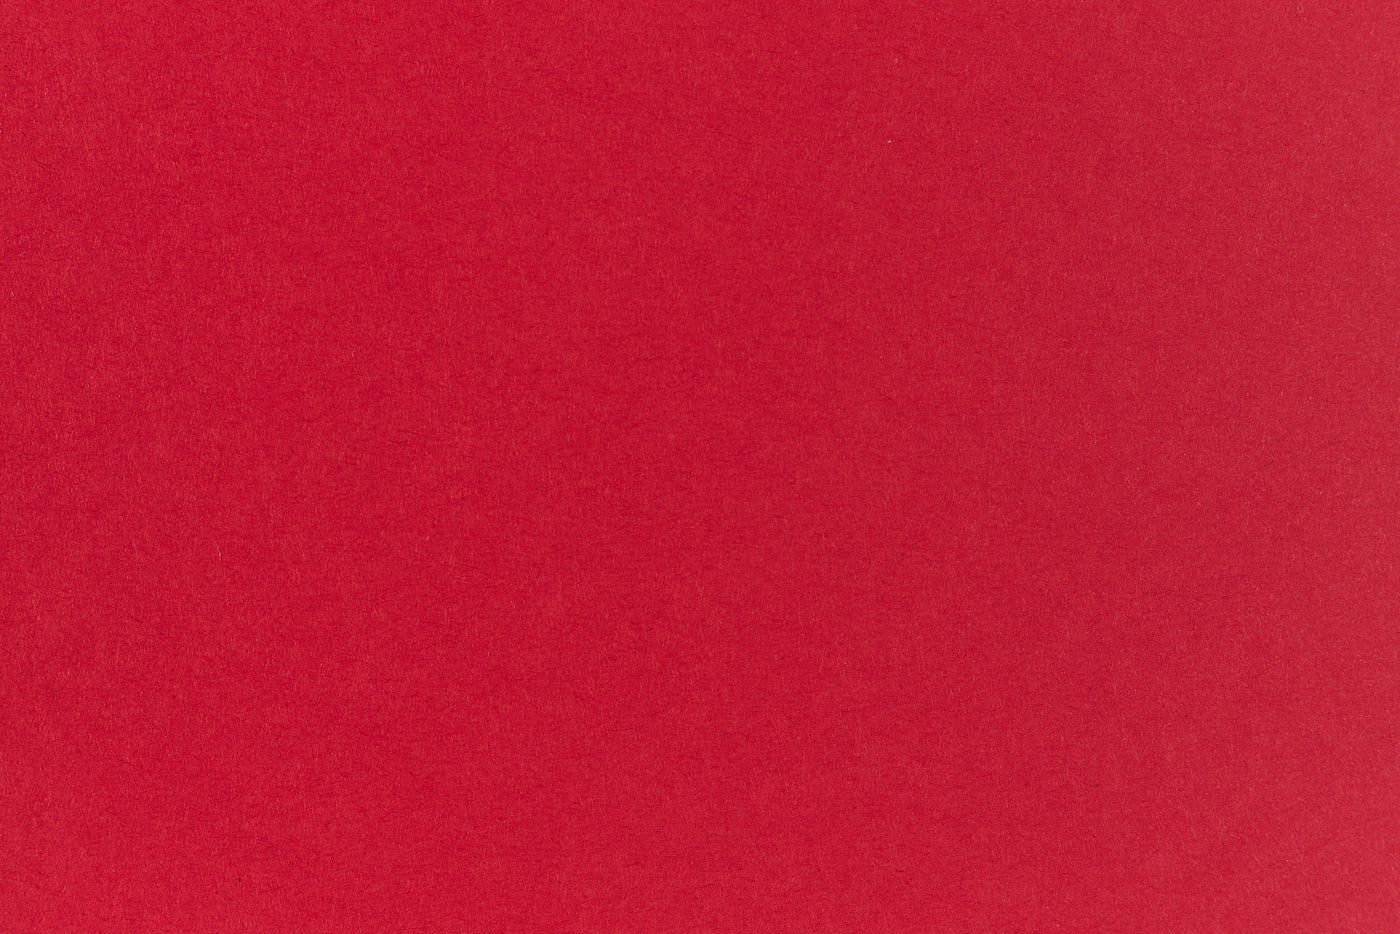 Blu Raspberry Cardstock - Cover Weight Paper - Pop-Tone – French Paper